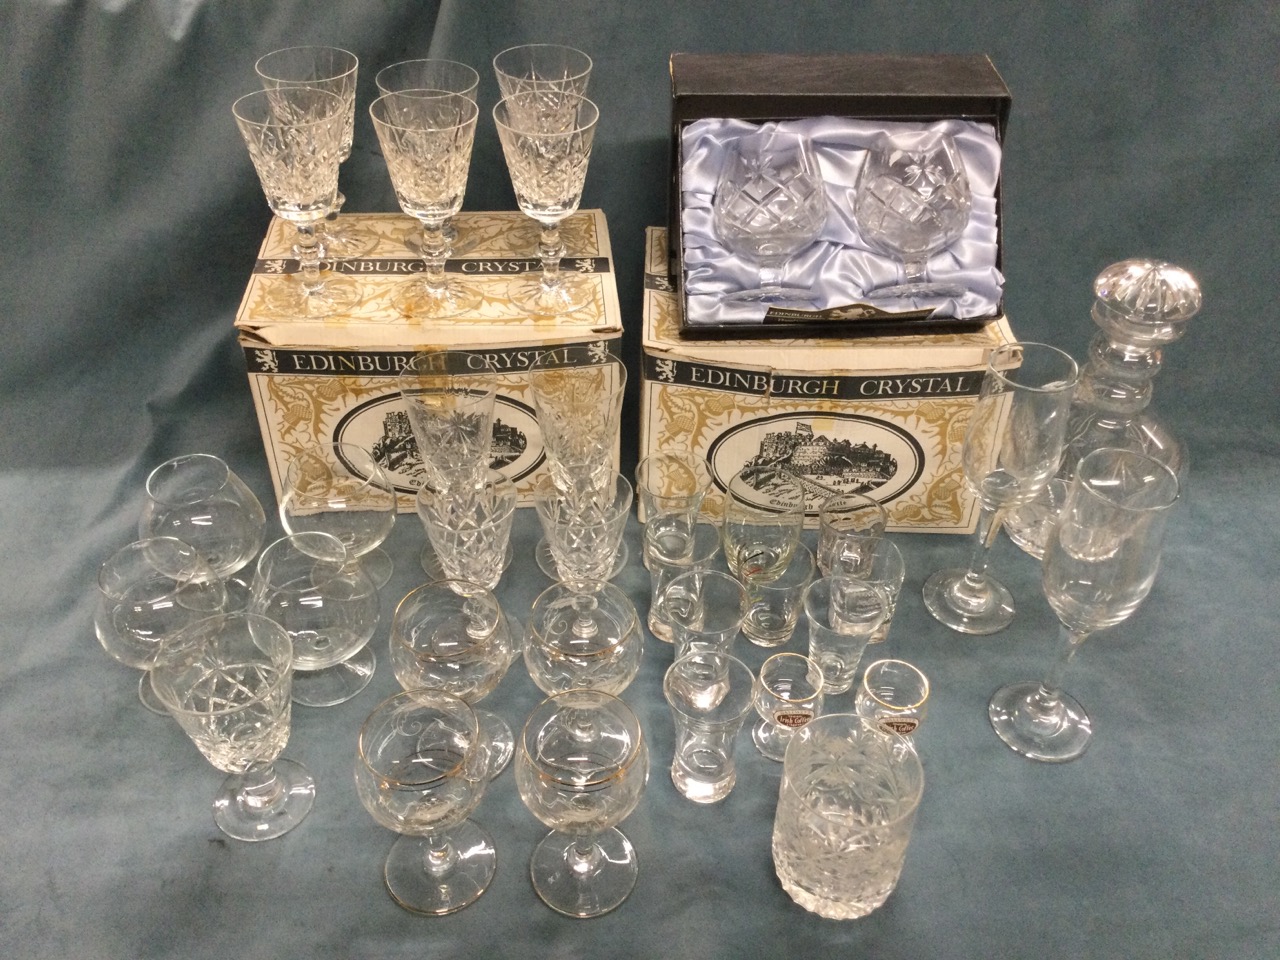 Miscellaneous drinking glasses and a decanter, including some boxed Edinburgh crystal wine